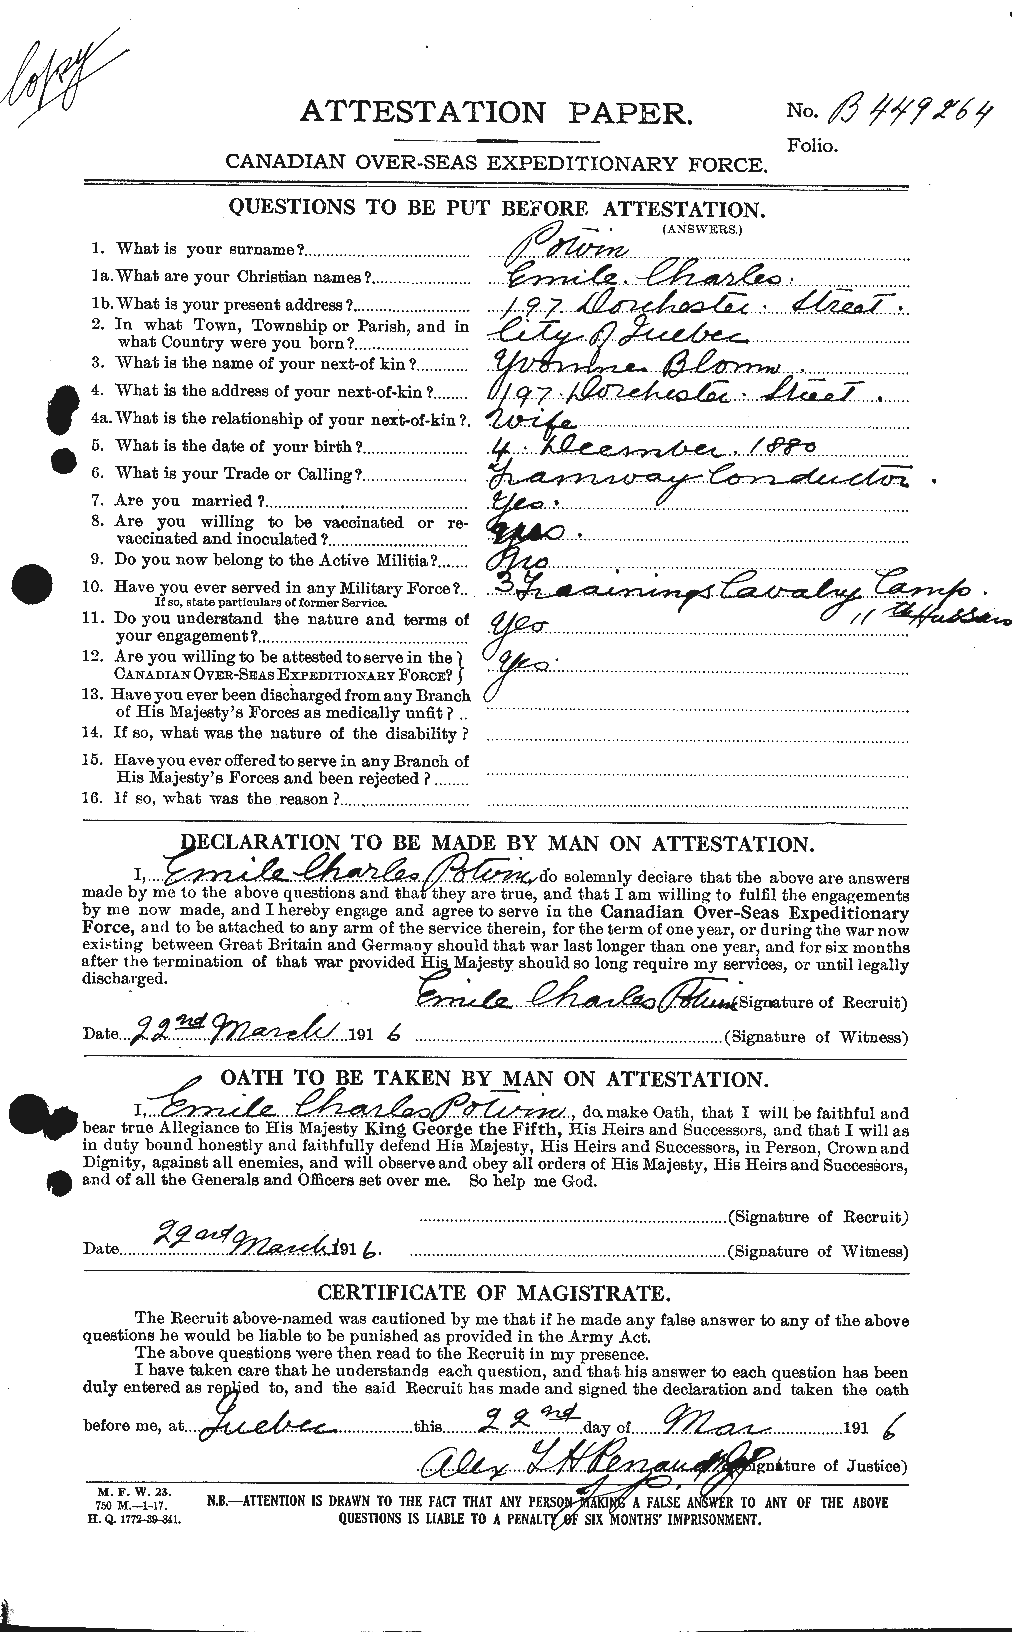 Personnel Records of the First World War - CEF 584625a